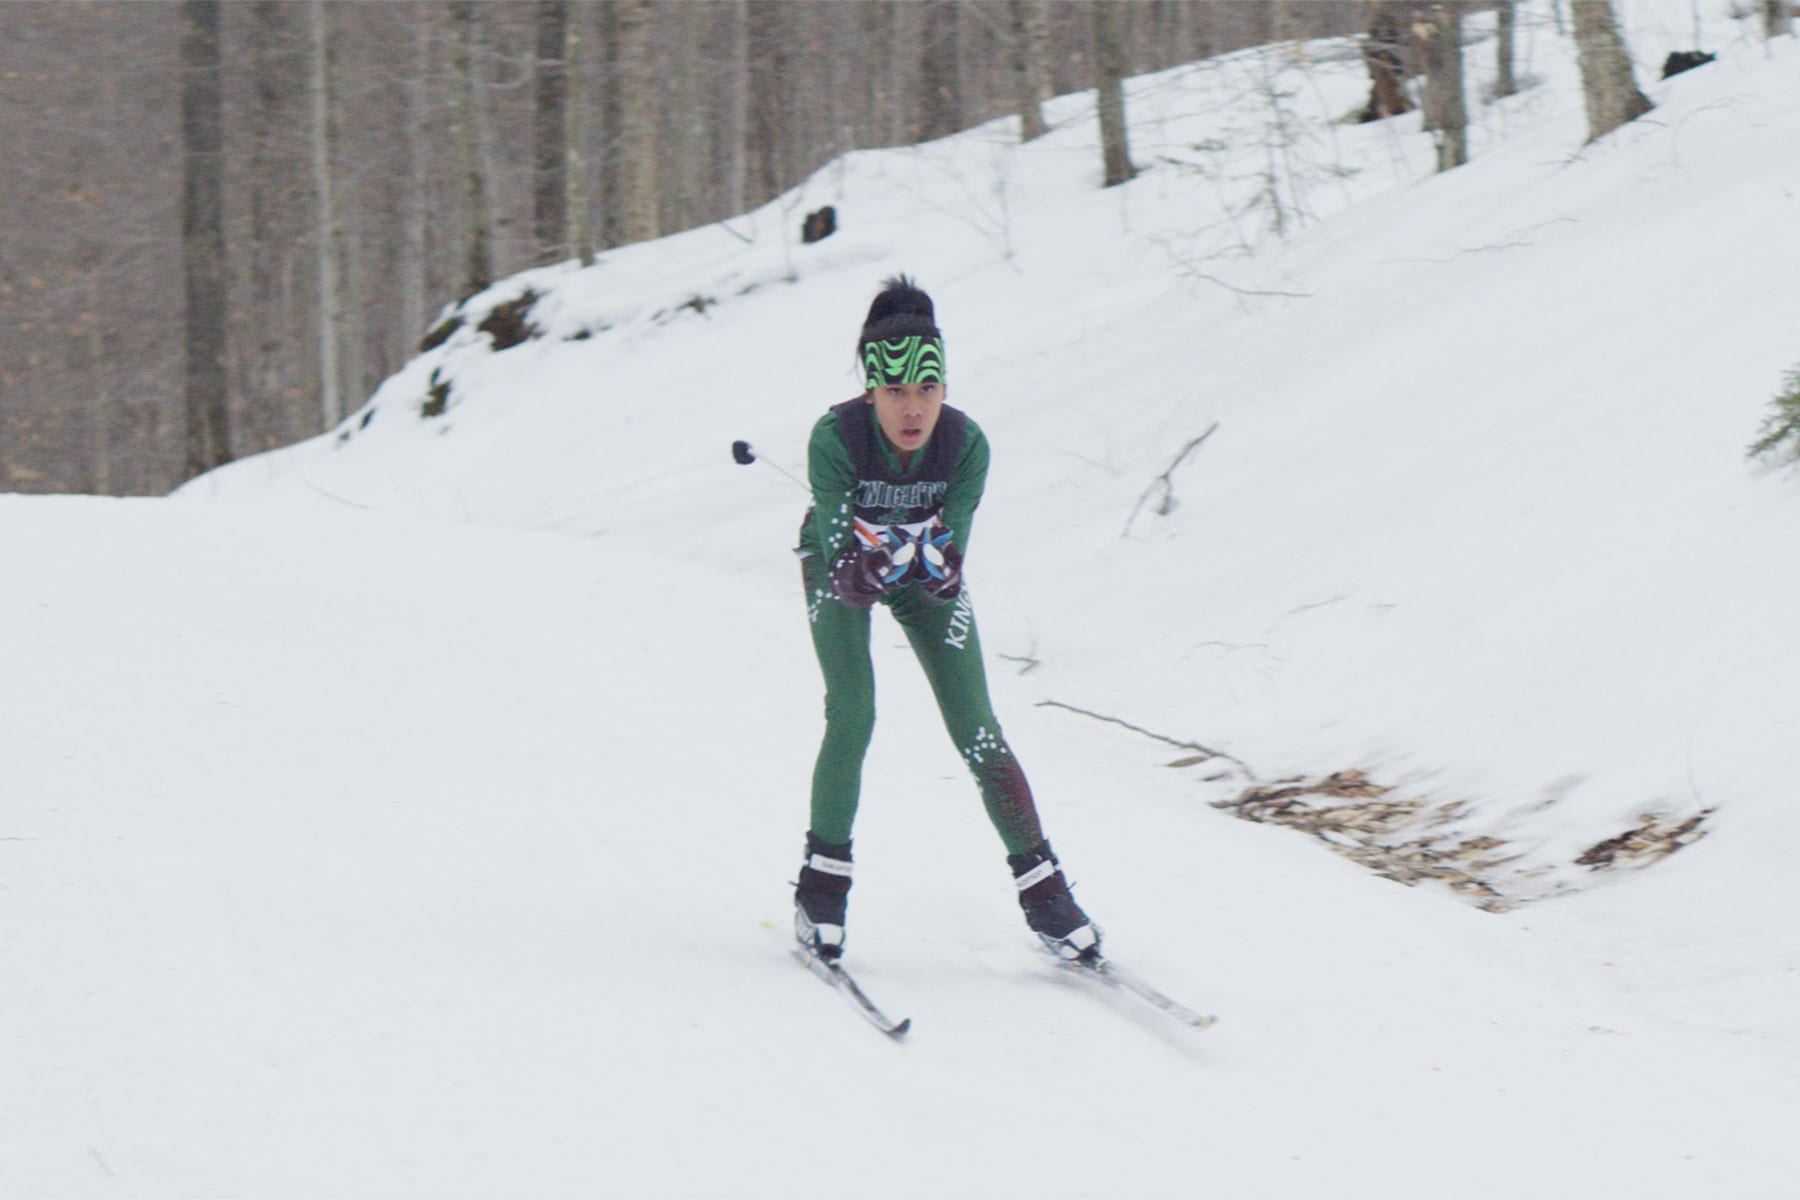 A girl skiing in a snowy forest.